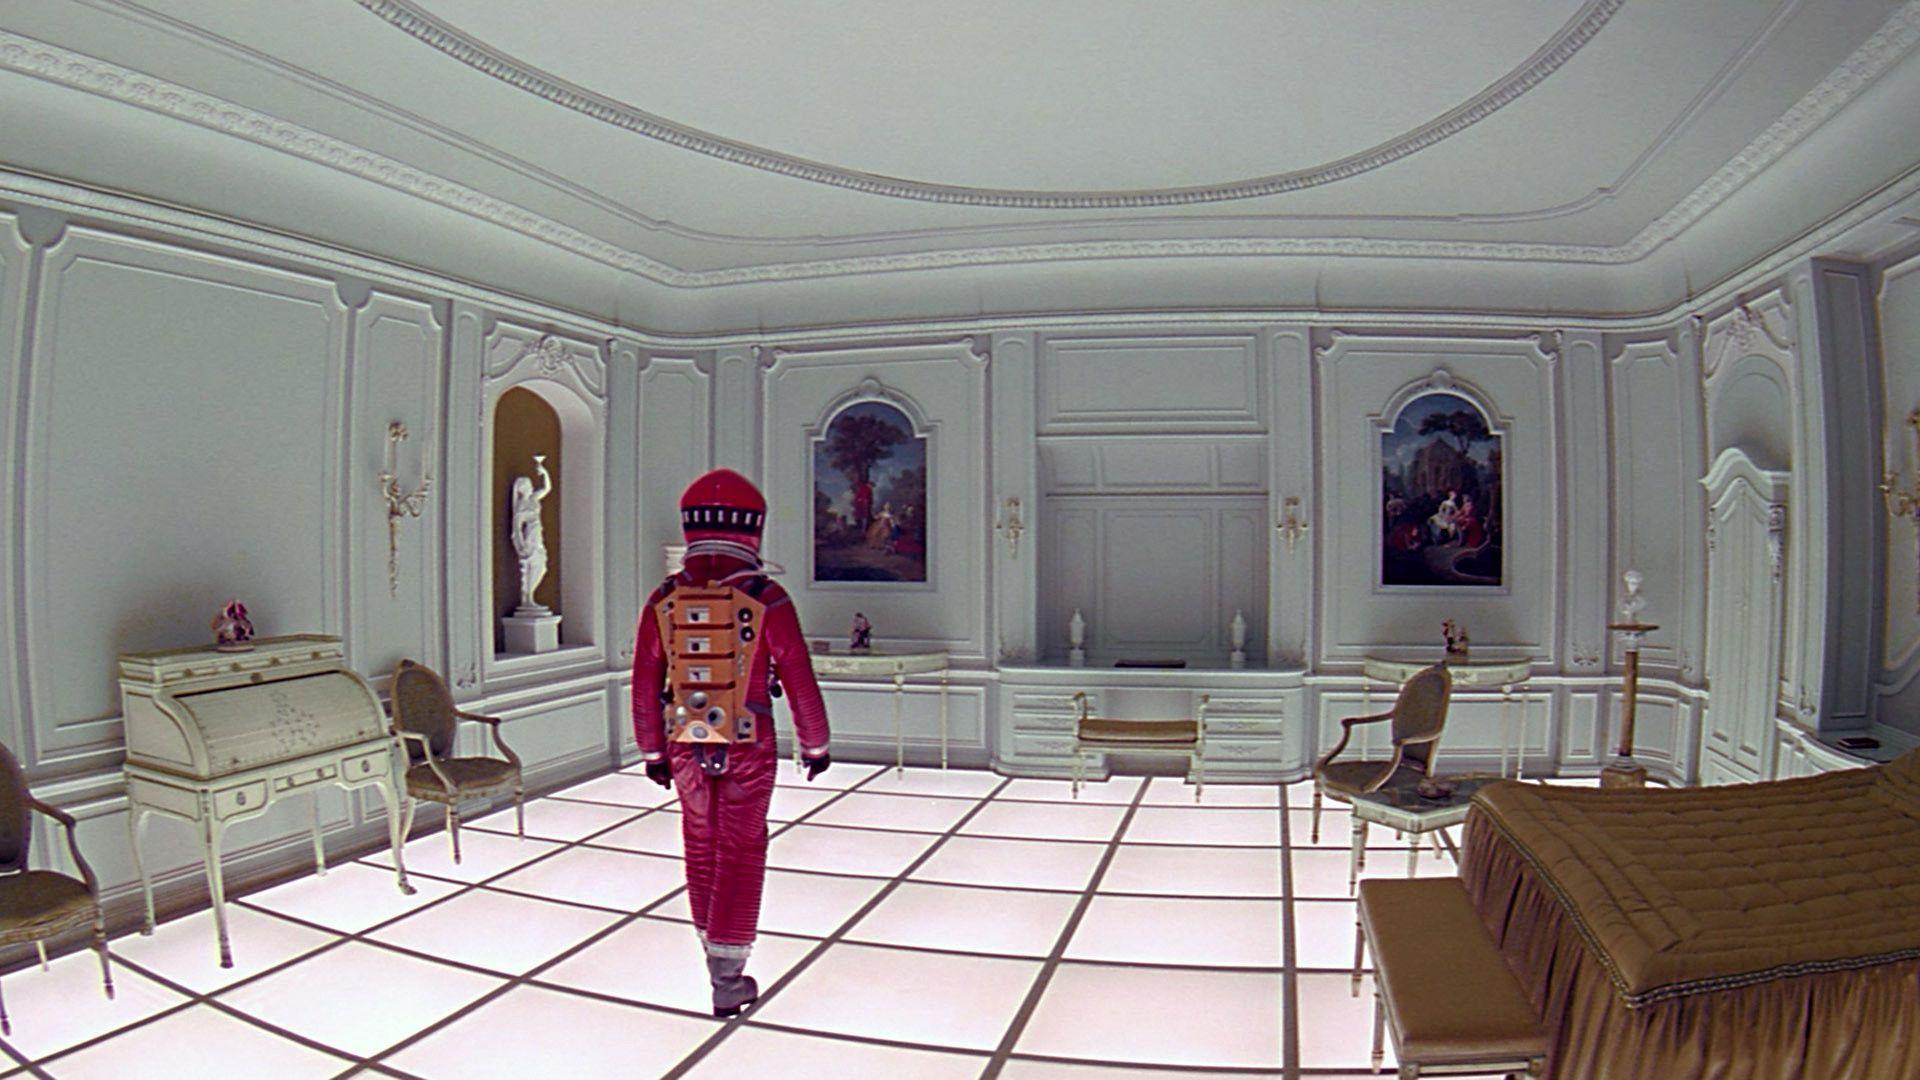 2001 a space odyssey scenes